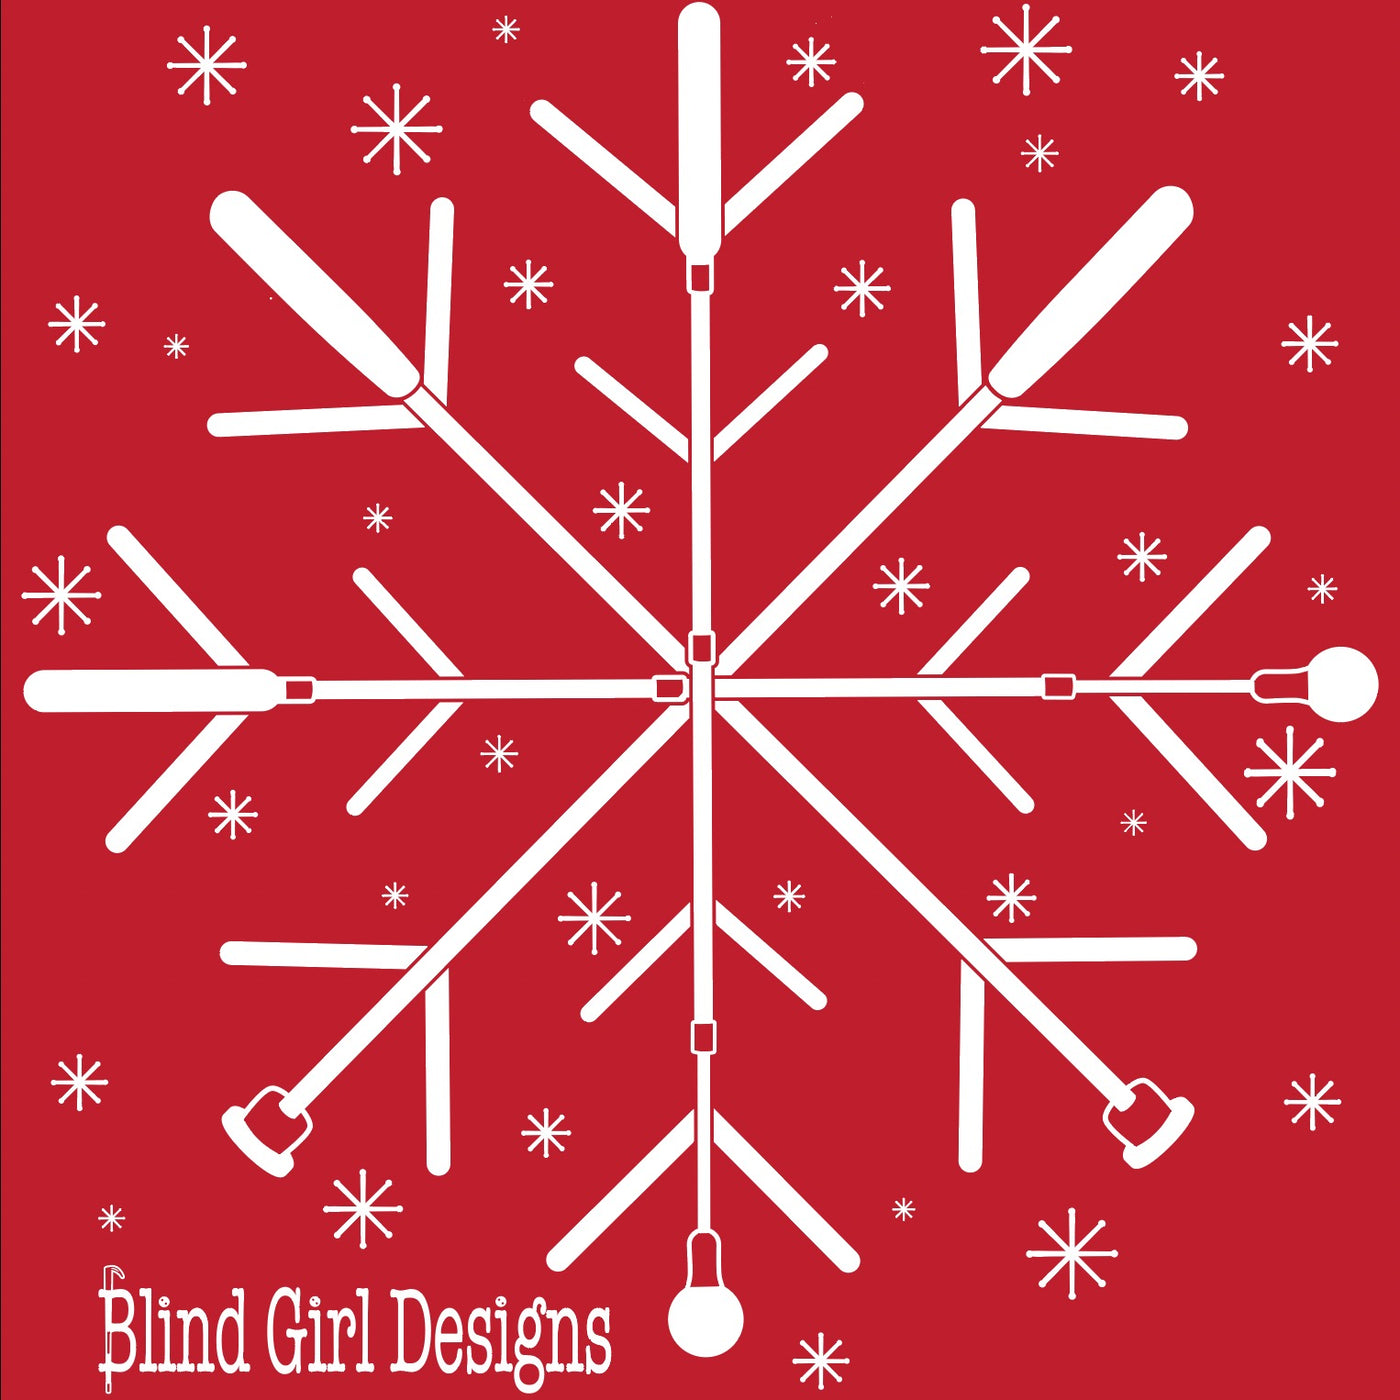 New! 3D Tactile White Cane Snowflake T-Shirt - bright red